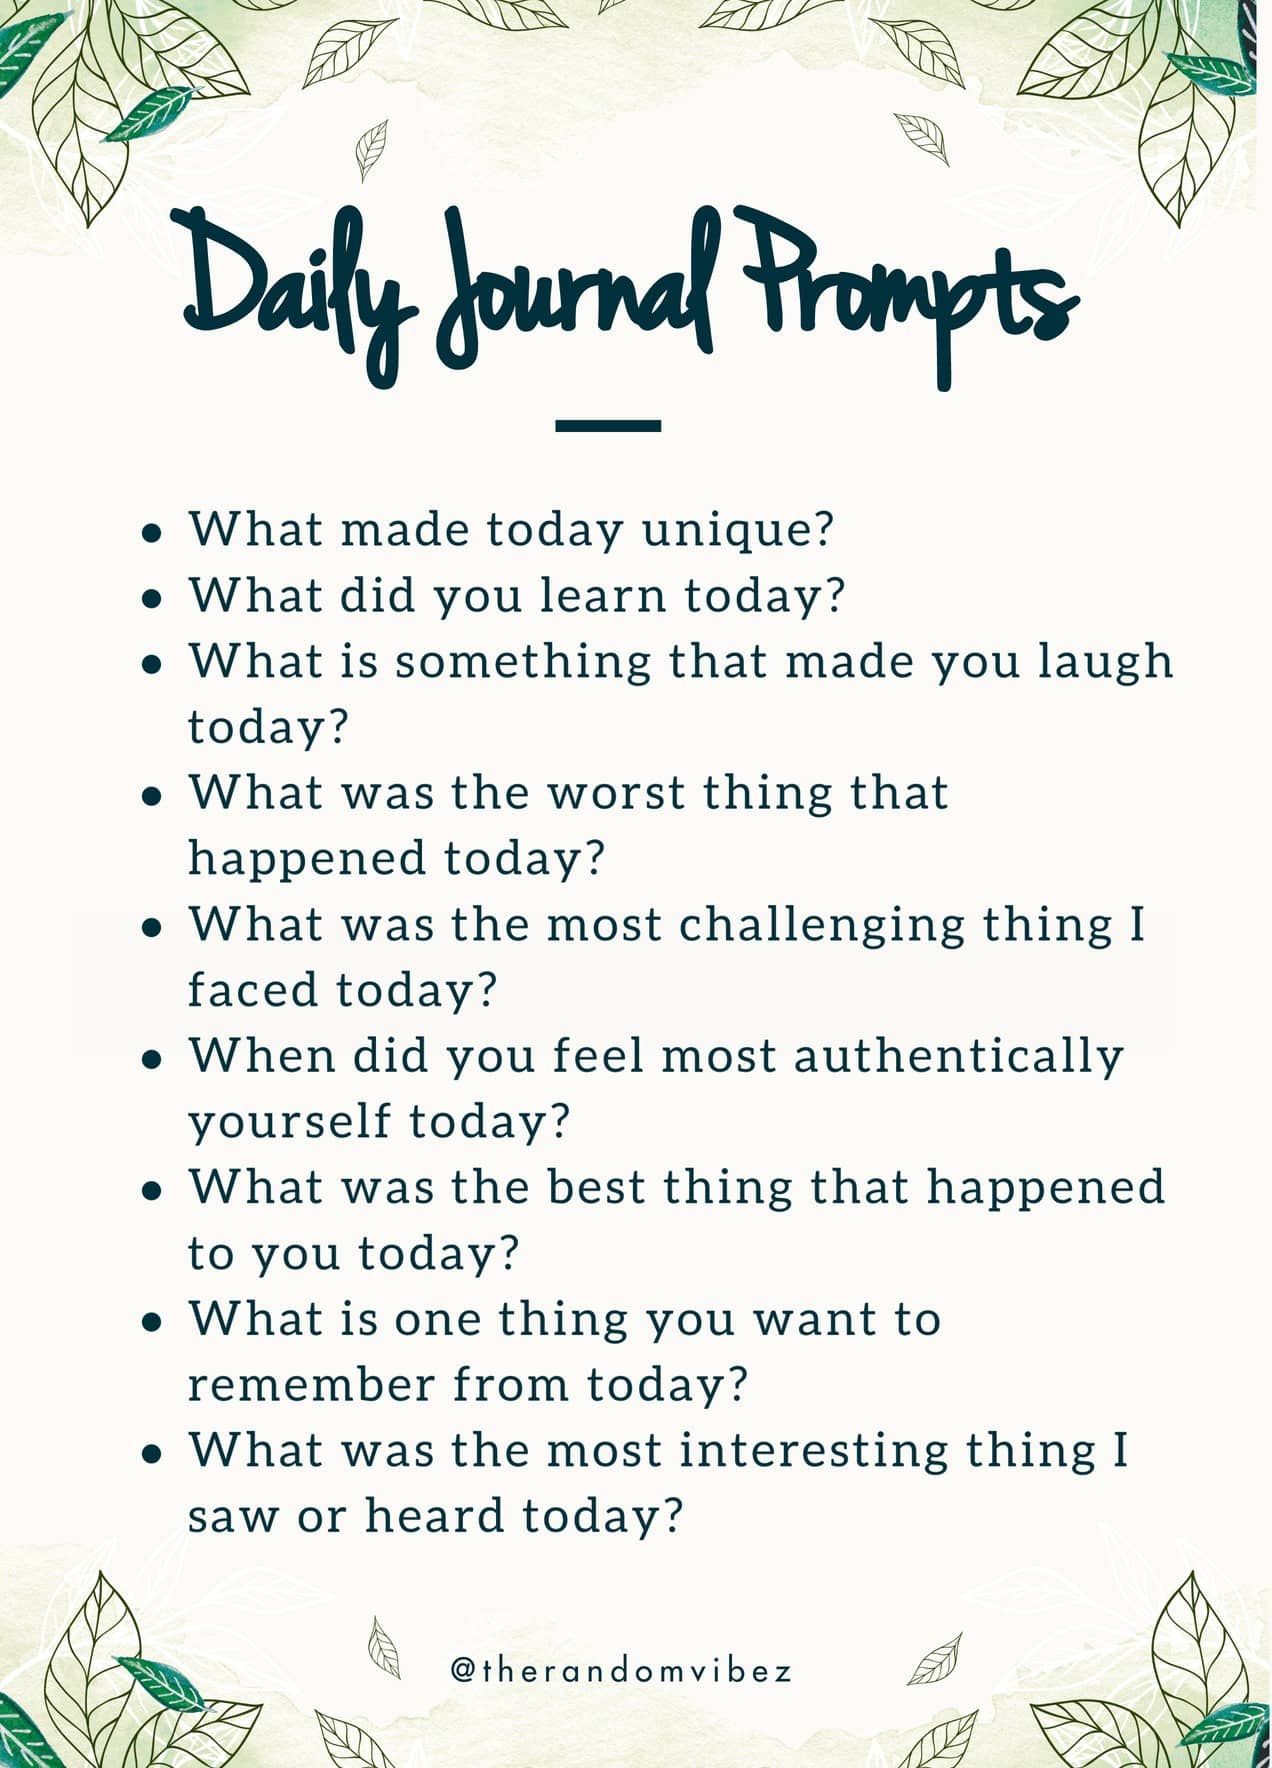 Daily Journal Prompts, Ideas, and Questions for Reflection